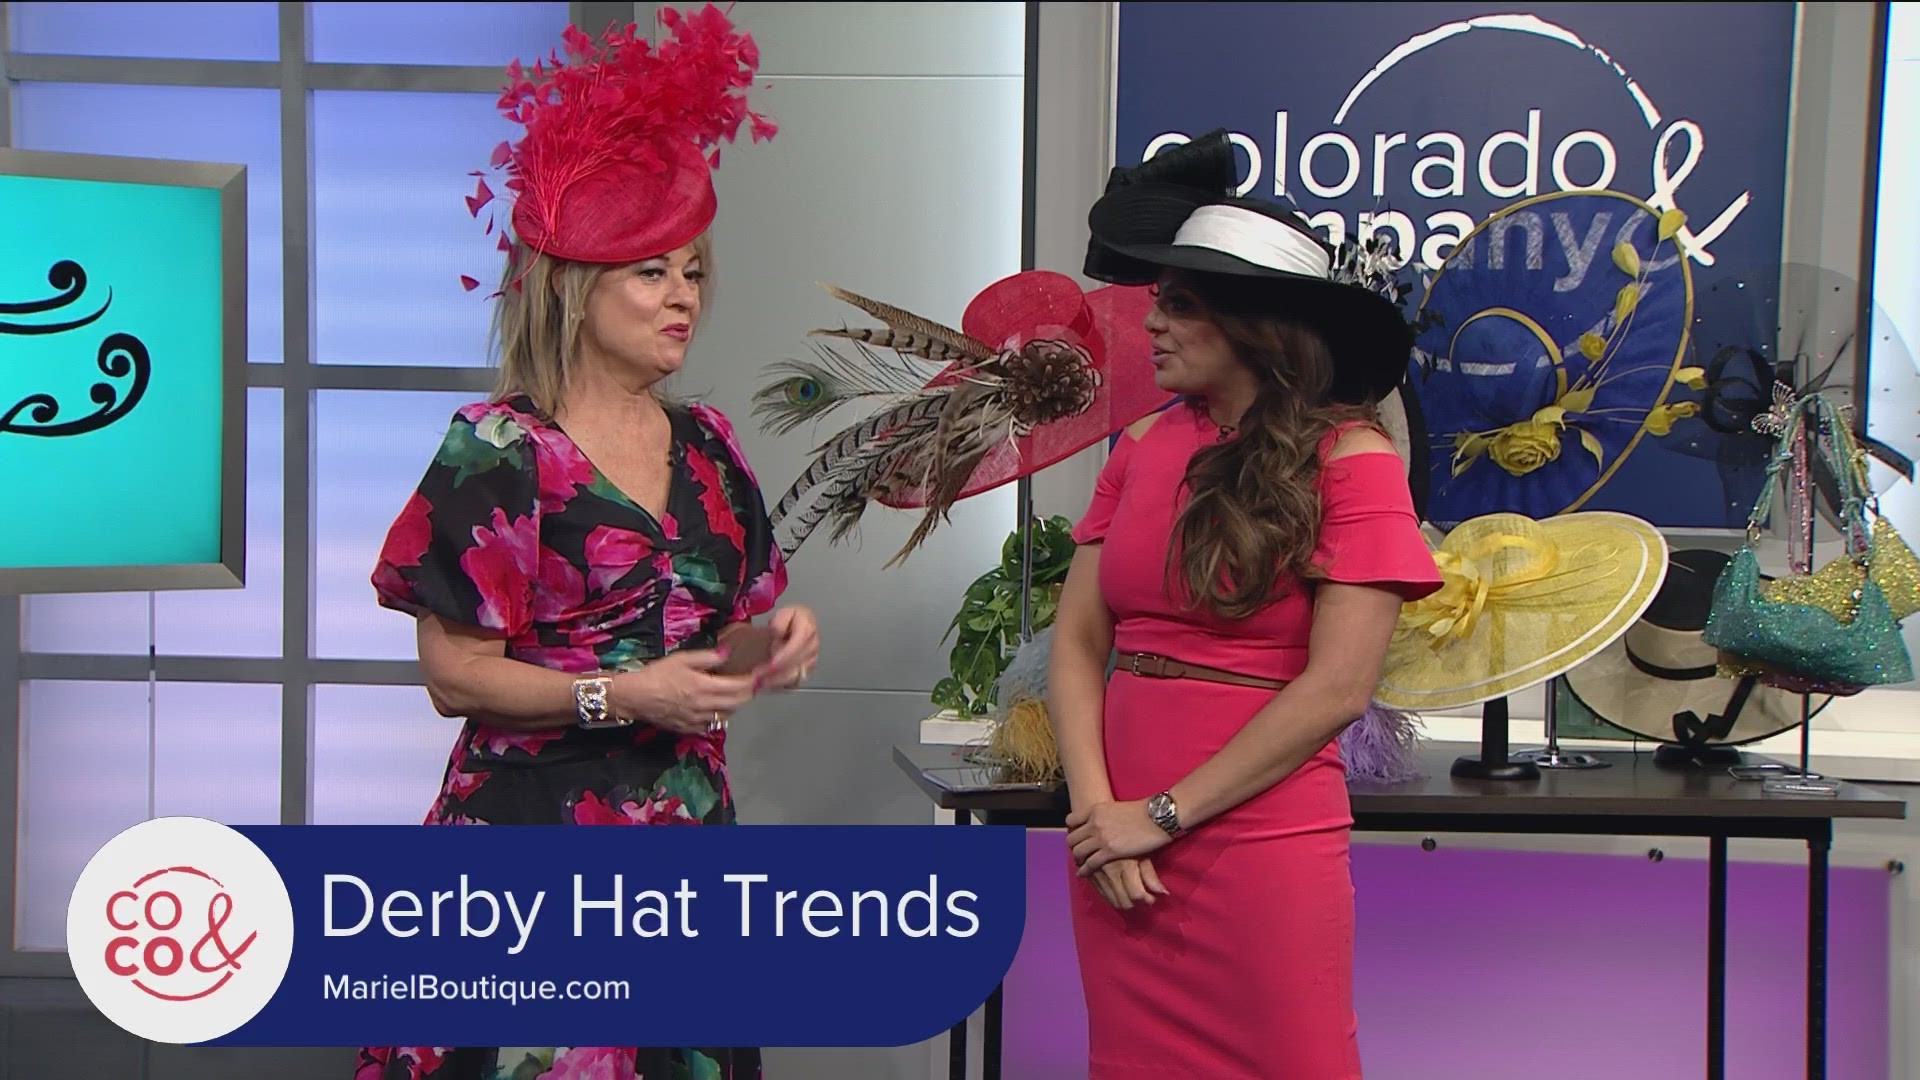 Find the perfect look for your Derby watch party at Mariel in Cherry Creek! Learn more at MarielBoutique.com.